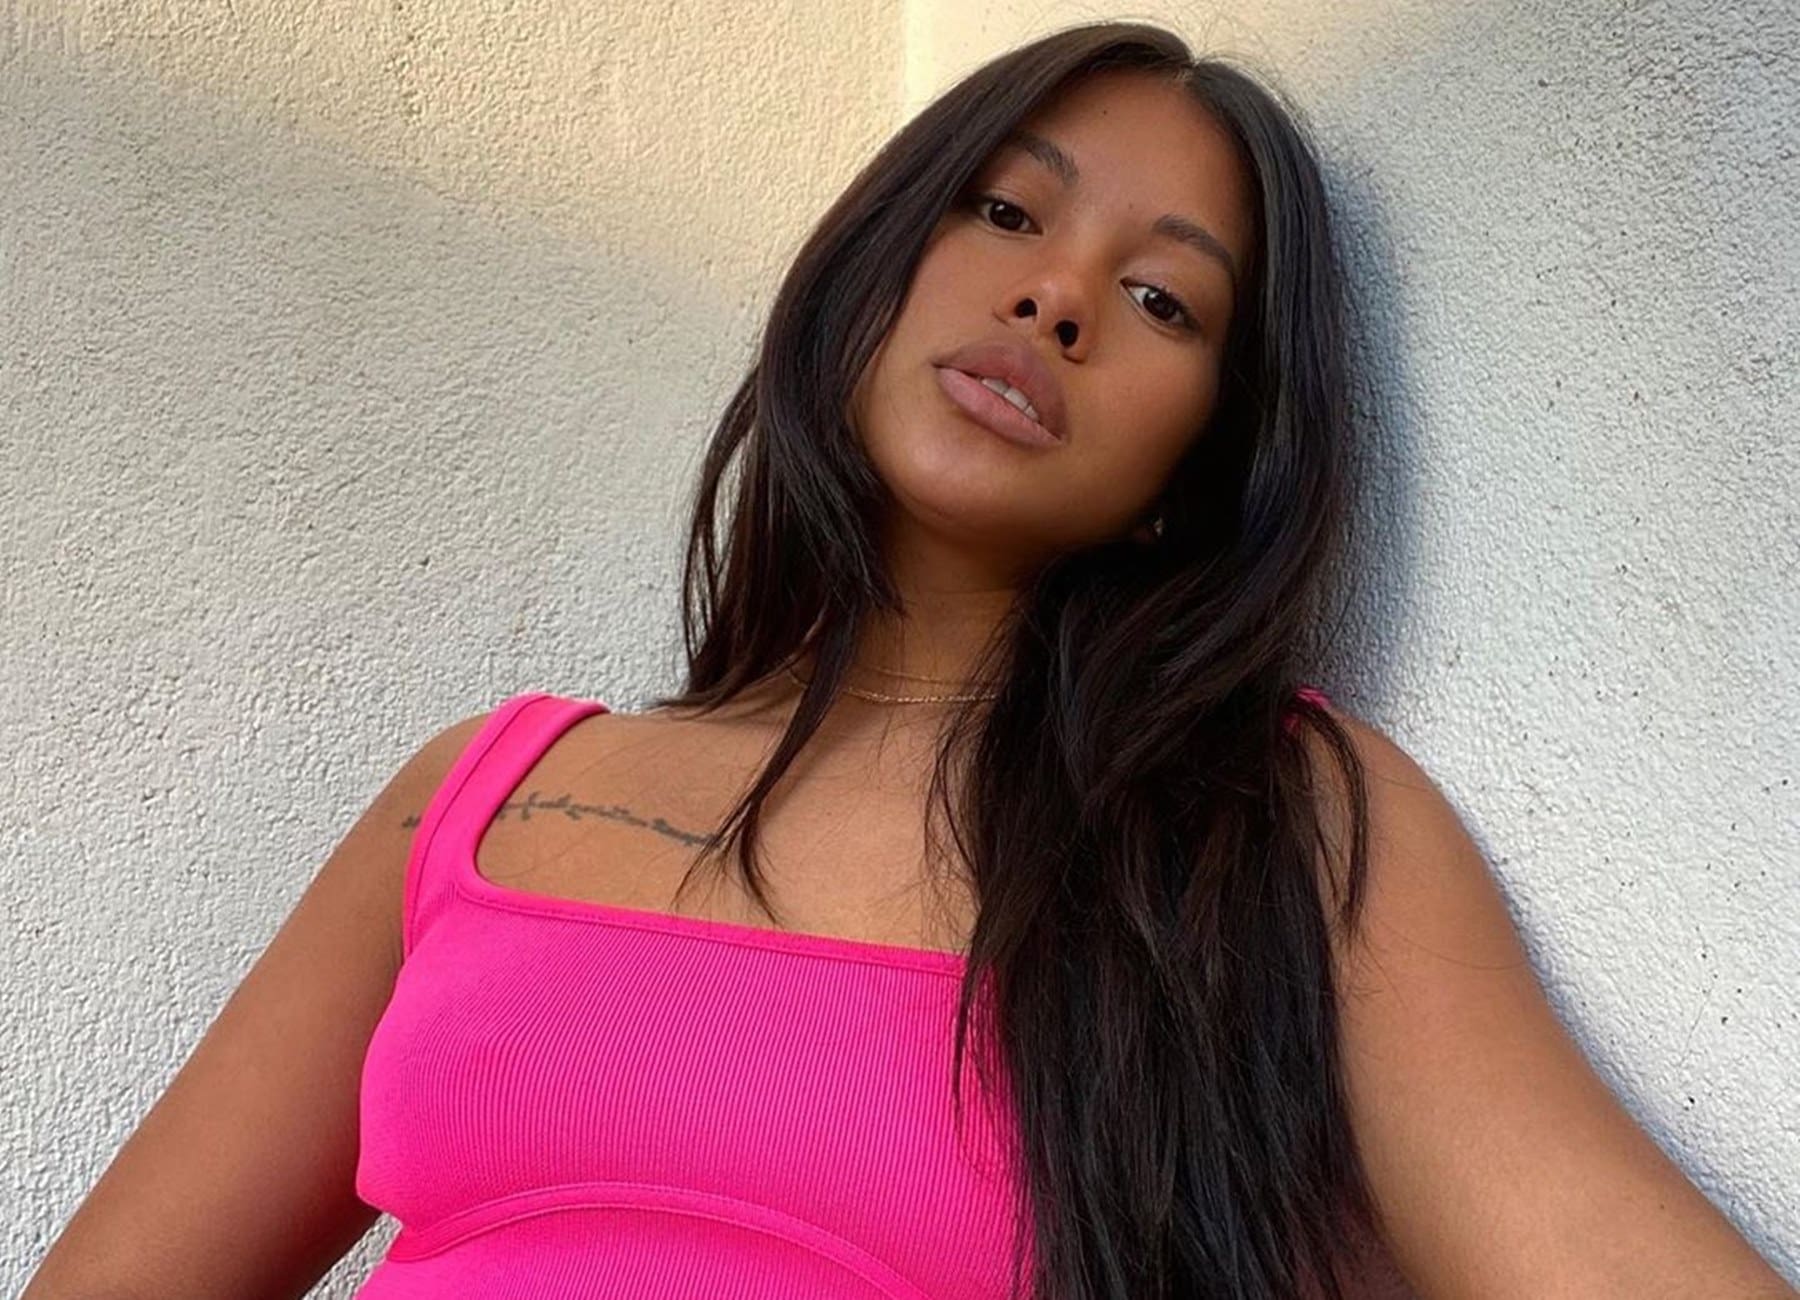 Chris Brown's Baby Mama, Ammika Harris Shocks Fans With This Photo Session - Did She Show Too Much?